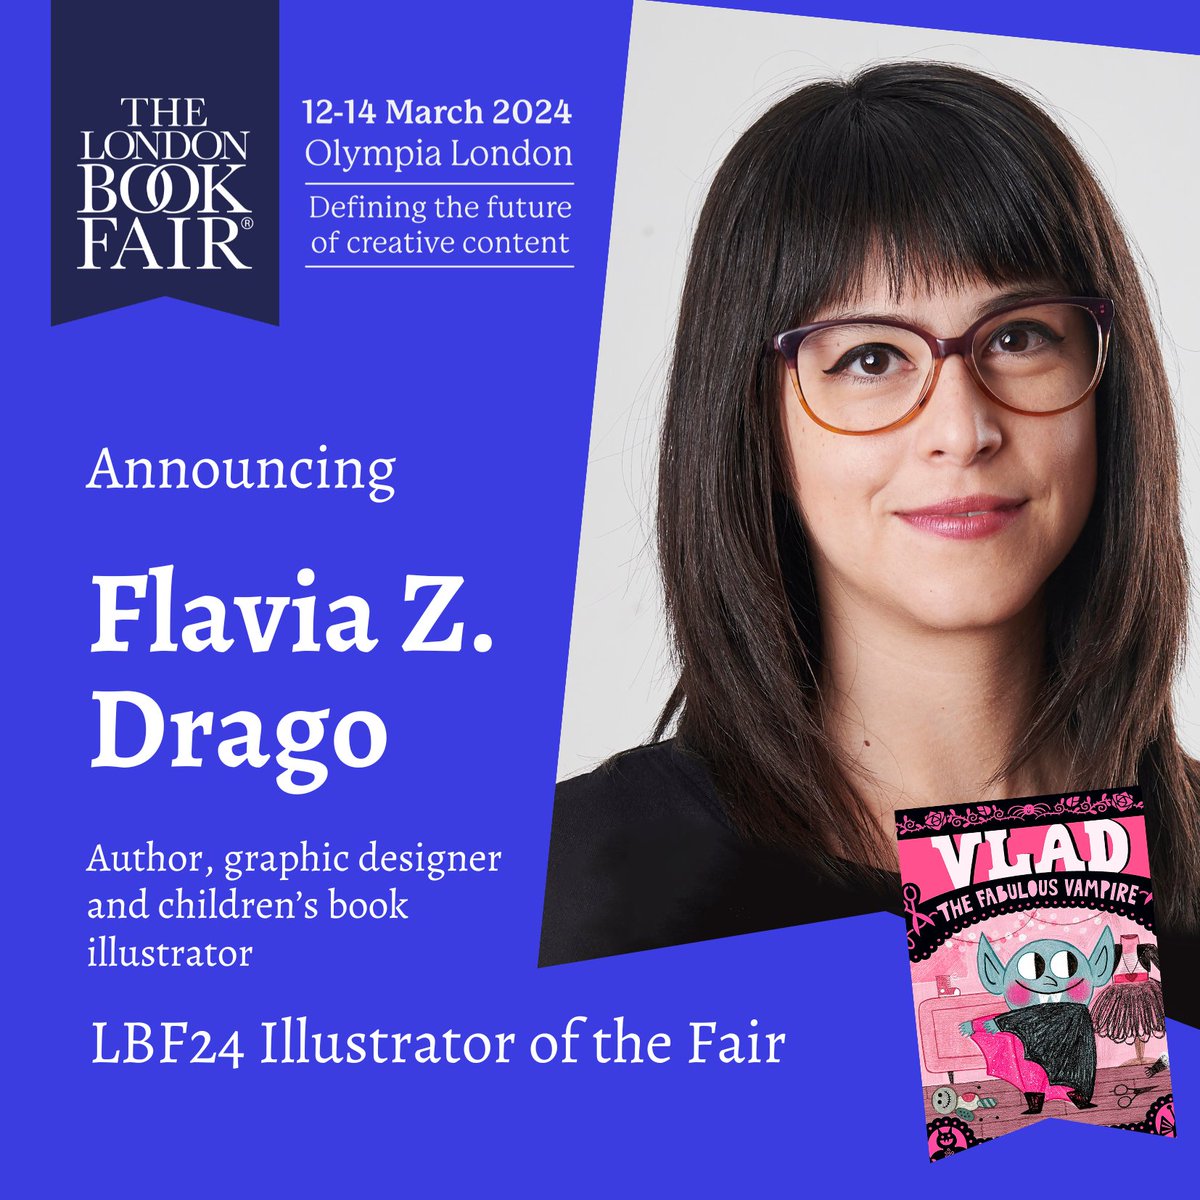 Unmissable @LondonBookFair event for anyone interested in children's book #illustration. #KlausFluggePrize winner Illustrator of the Fair Flavia Z. Drago in conversation with @Mat_at_Brookes Weds 13 March. 👀
londonbookfair.co.uk/en-gb/whats-on…